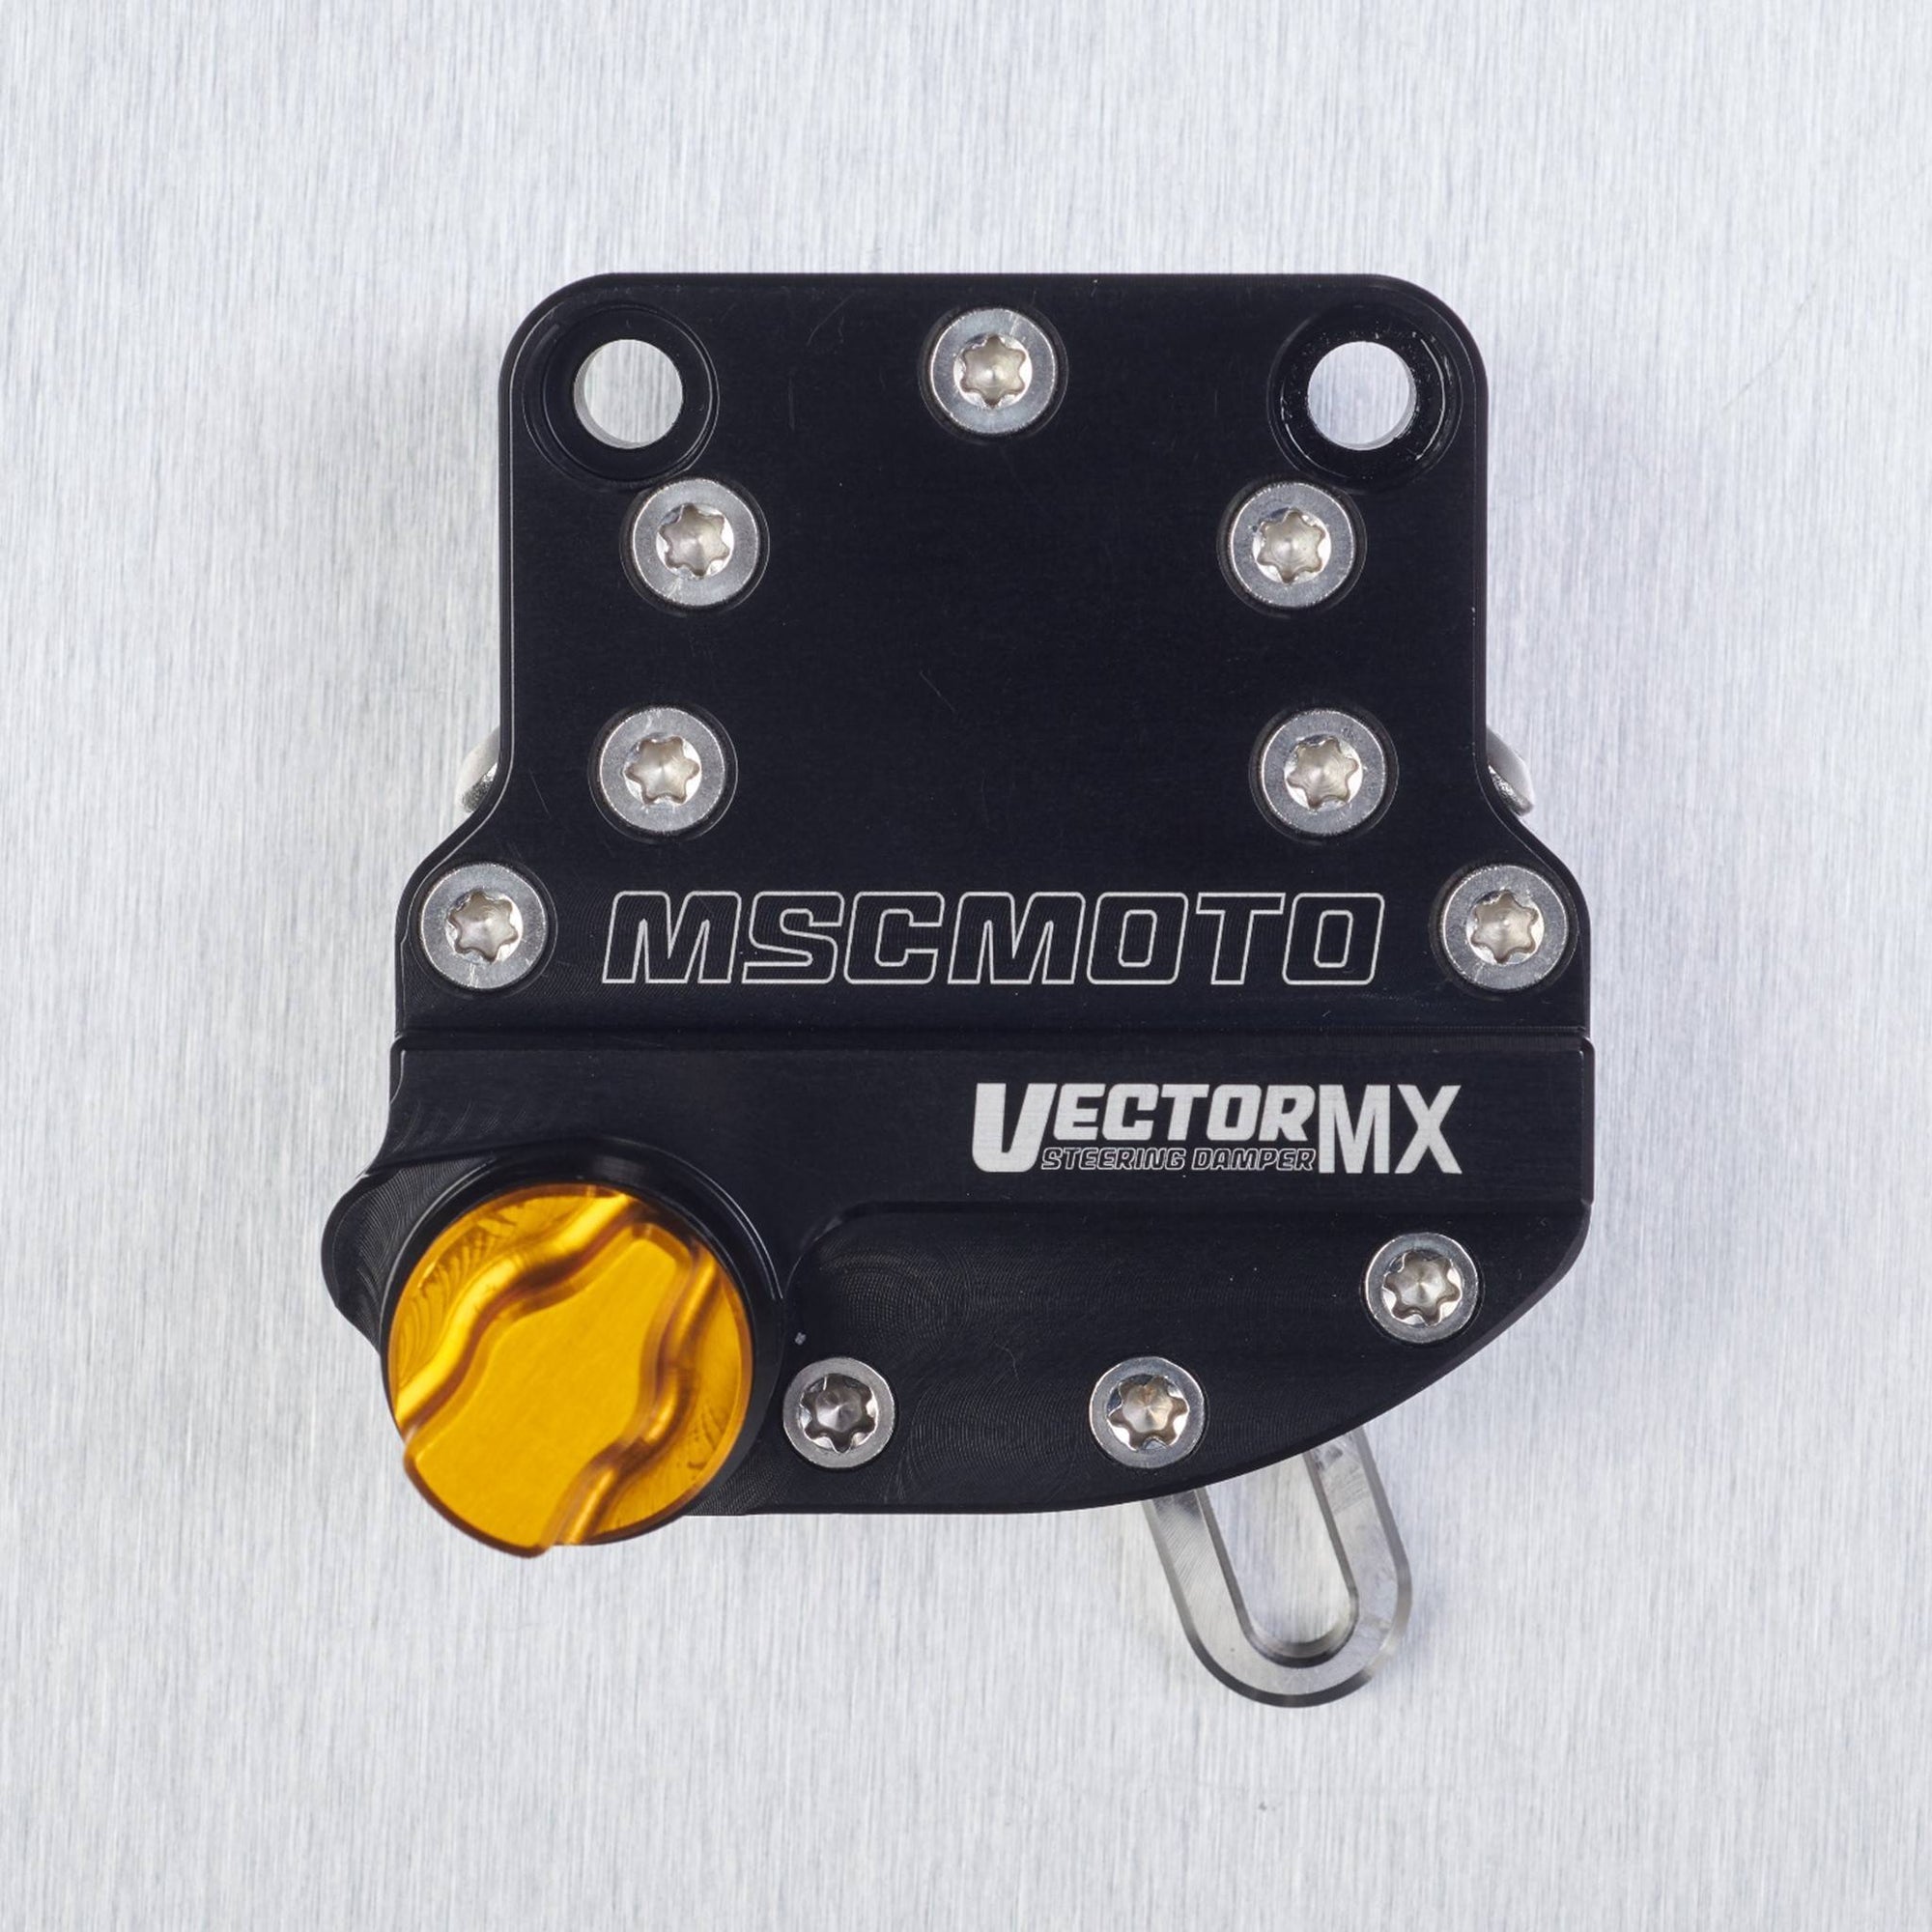 mscmotousa, VectorMX Steering Damper Kit "Down Under" Mount (VEC0001) - GAS GAS (EC, MC) KTM (EXC, SXF) HUSQVARNA (TC, TE, FC, FE) HUSABERG (FE, FX, TE), VEC0001, gas gas, gas-gas-2021-ec-250-esi5912814, husaberg, husaberg-2011-te-125-esi3907738, husqvarna, ktm, vectormx, , Imported and distributed in North & South America by Lindeco Genuine Powersports.